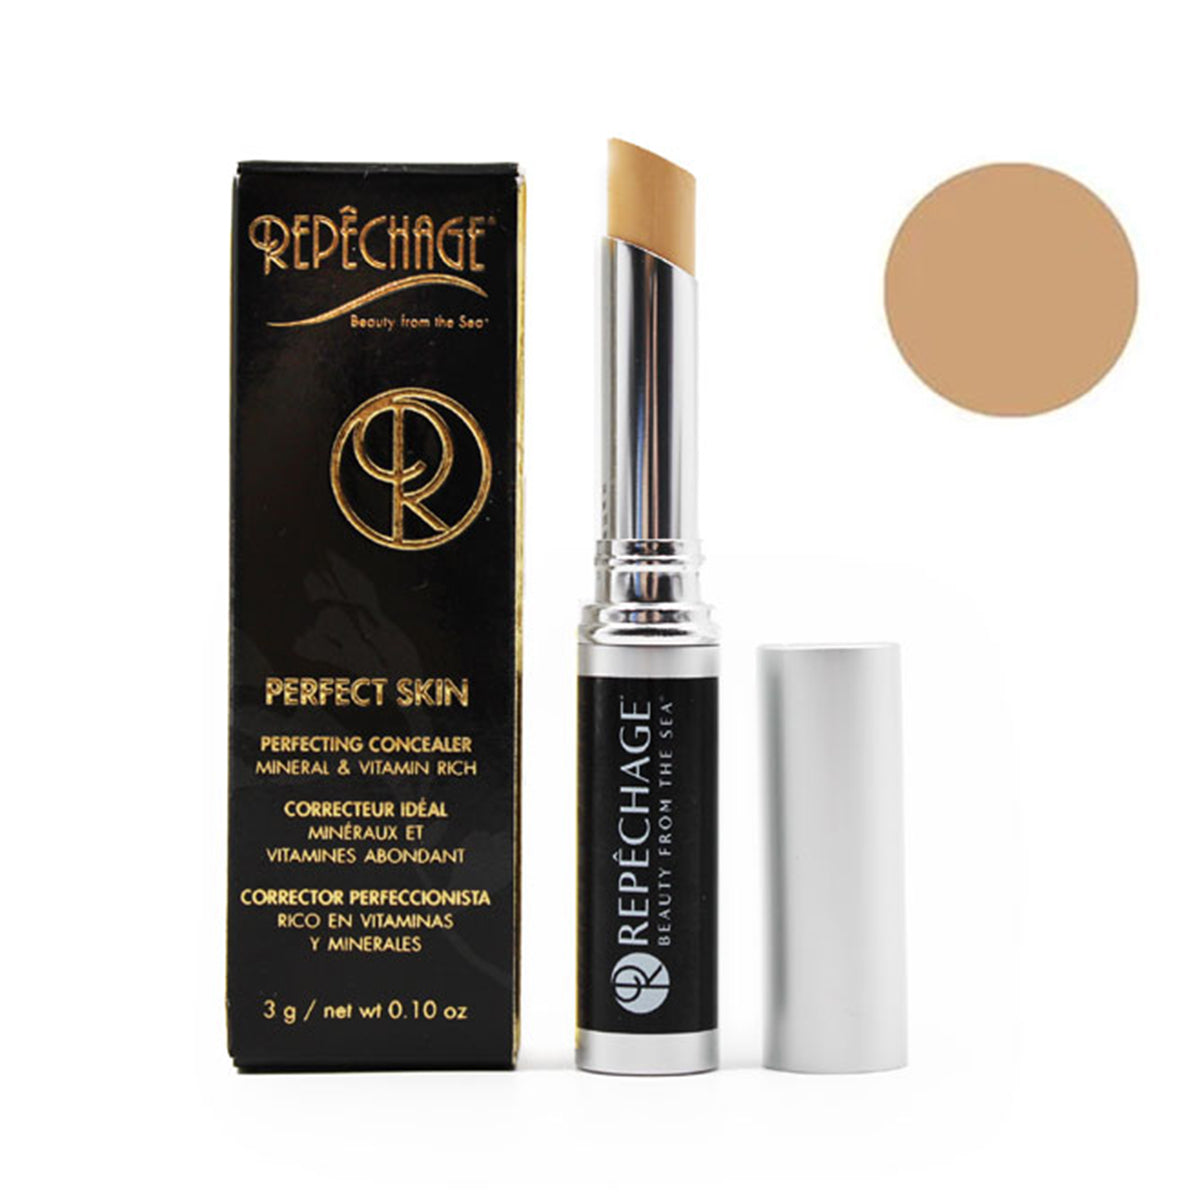 Perfect Skin Perfecting Concealer - Medium and packaging